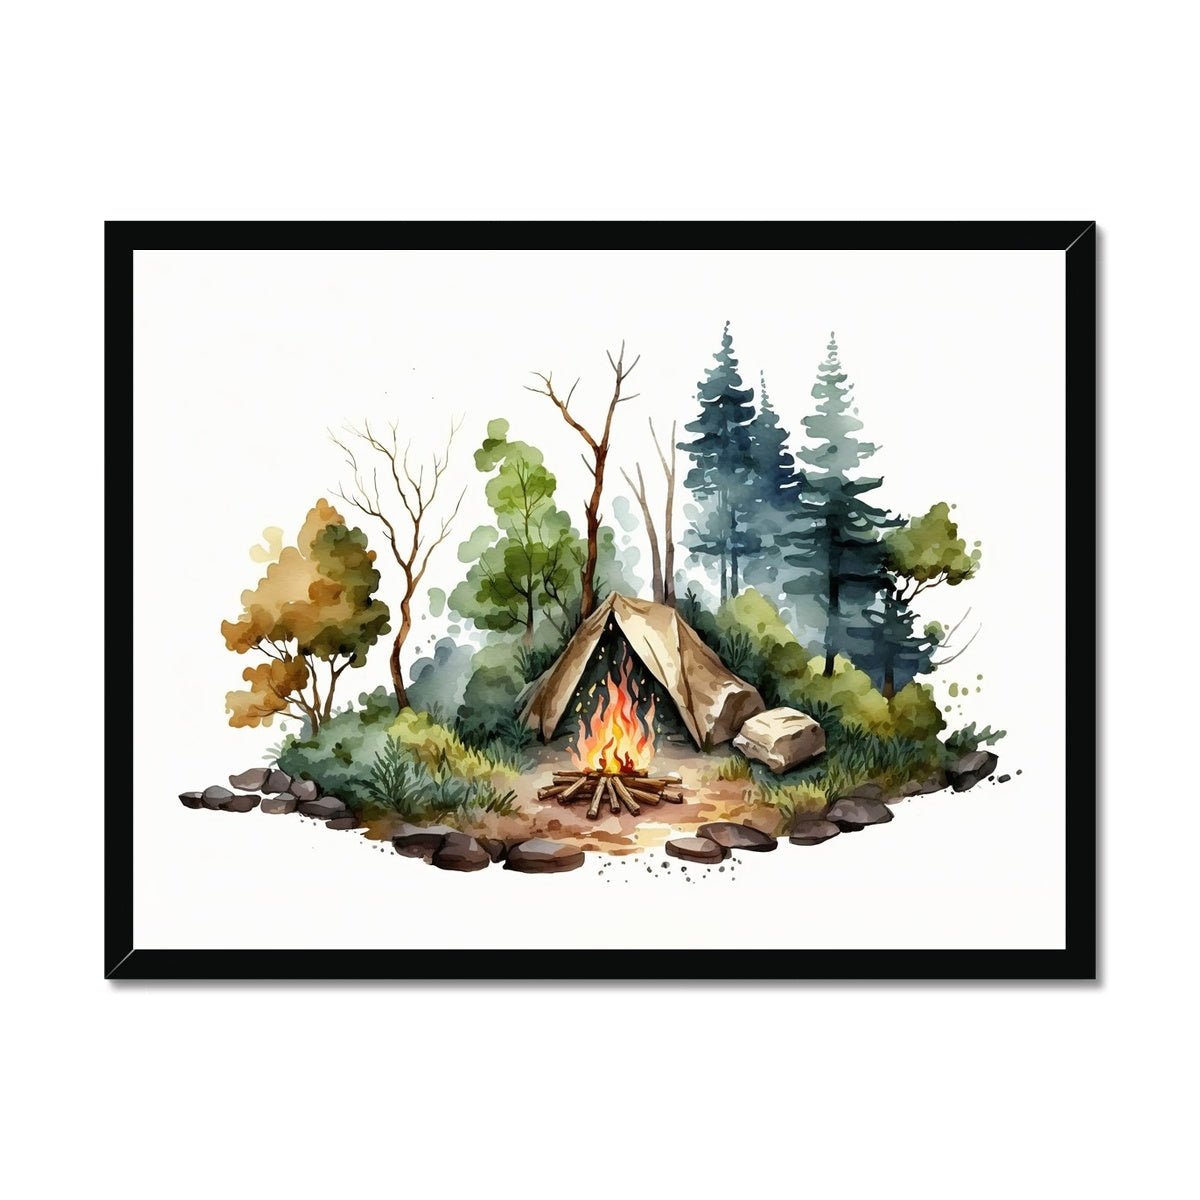 Nature's Serenity - Cozy Forest 1 1 - Landscapes Poster Print by doingly